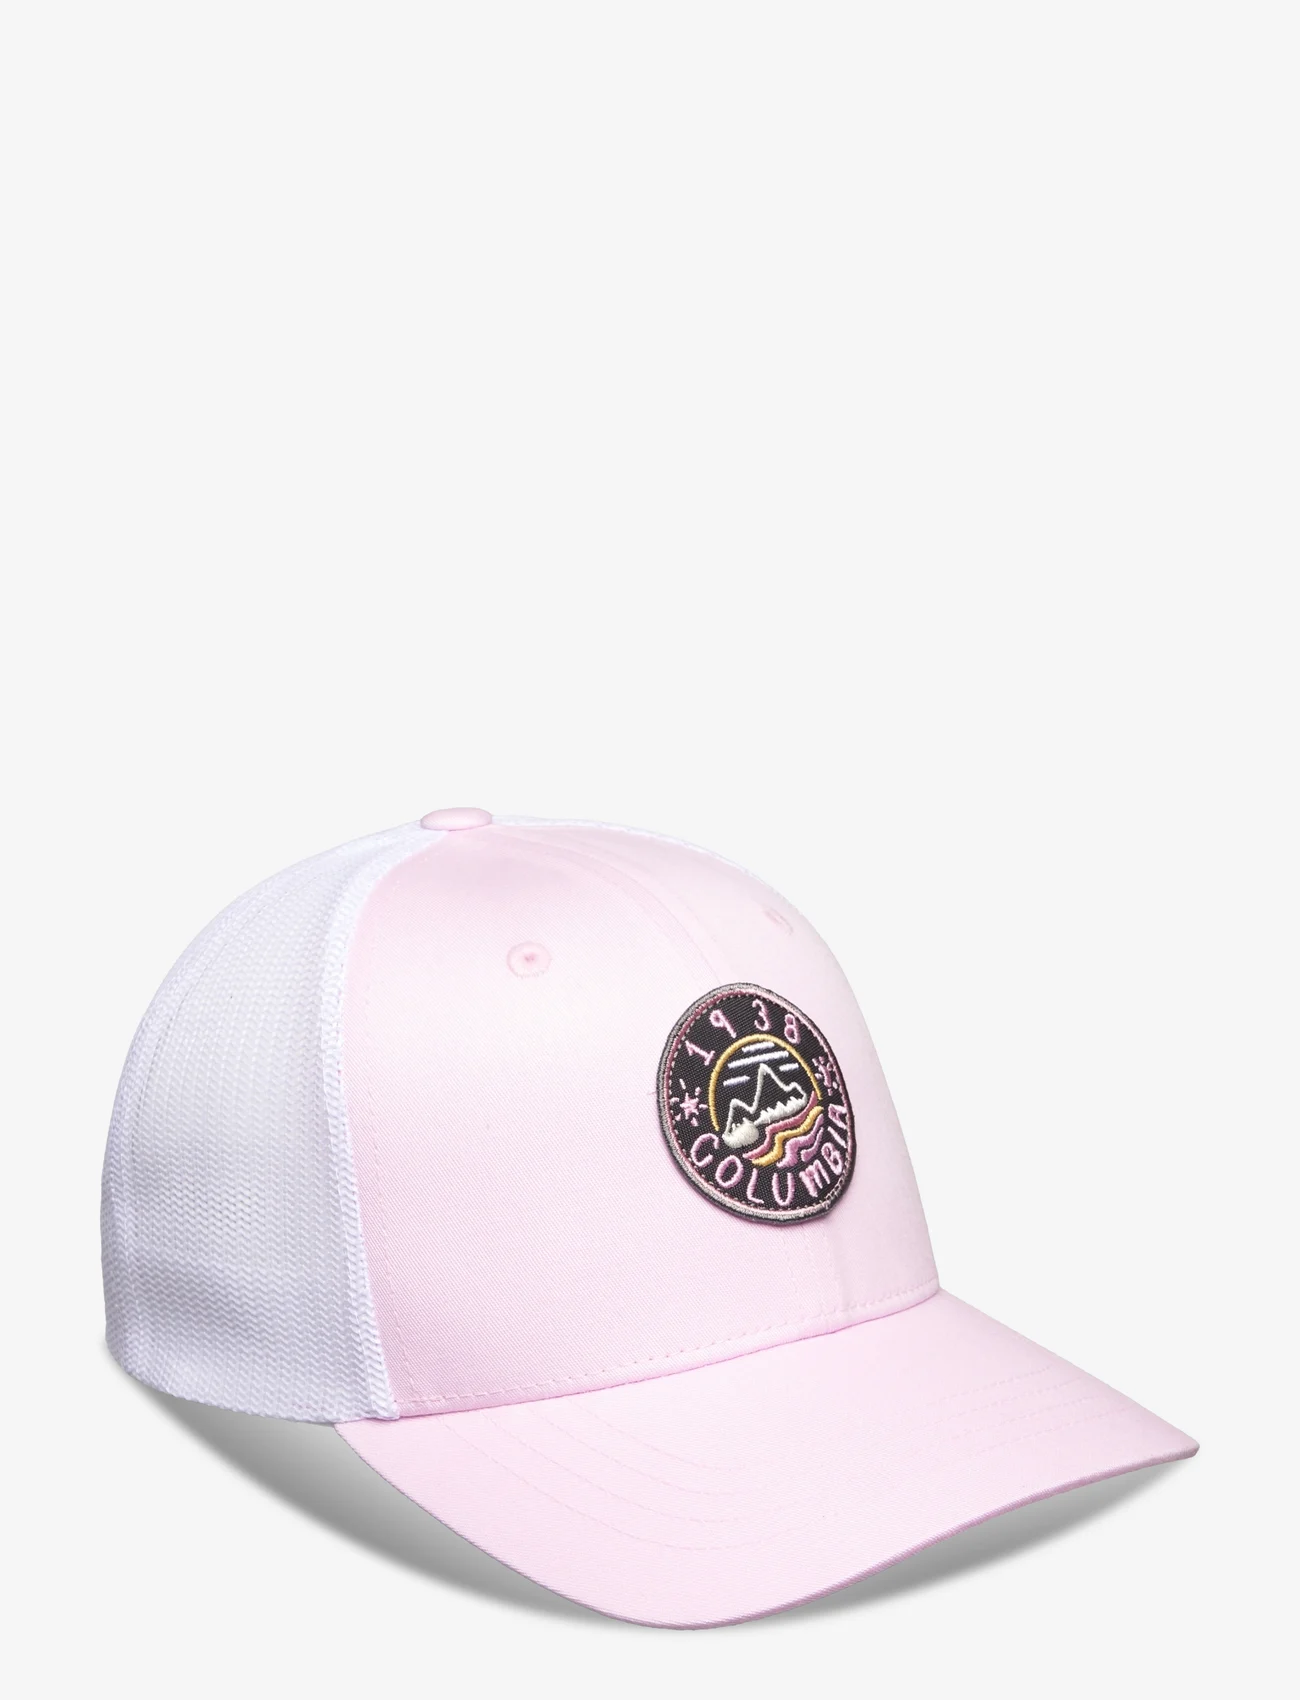 Columbia Sportswear - Columbia Youth Snap Back - gode sommertilbud - pink dawn, white, hot marker waves - 0